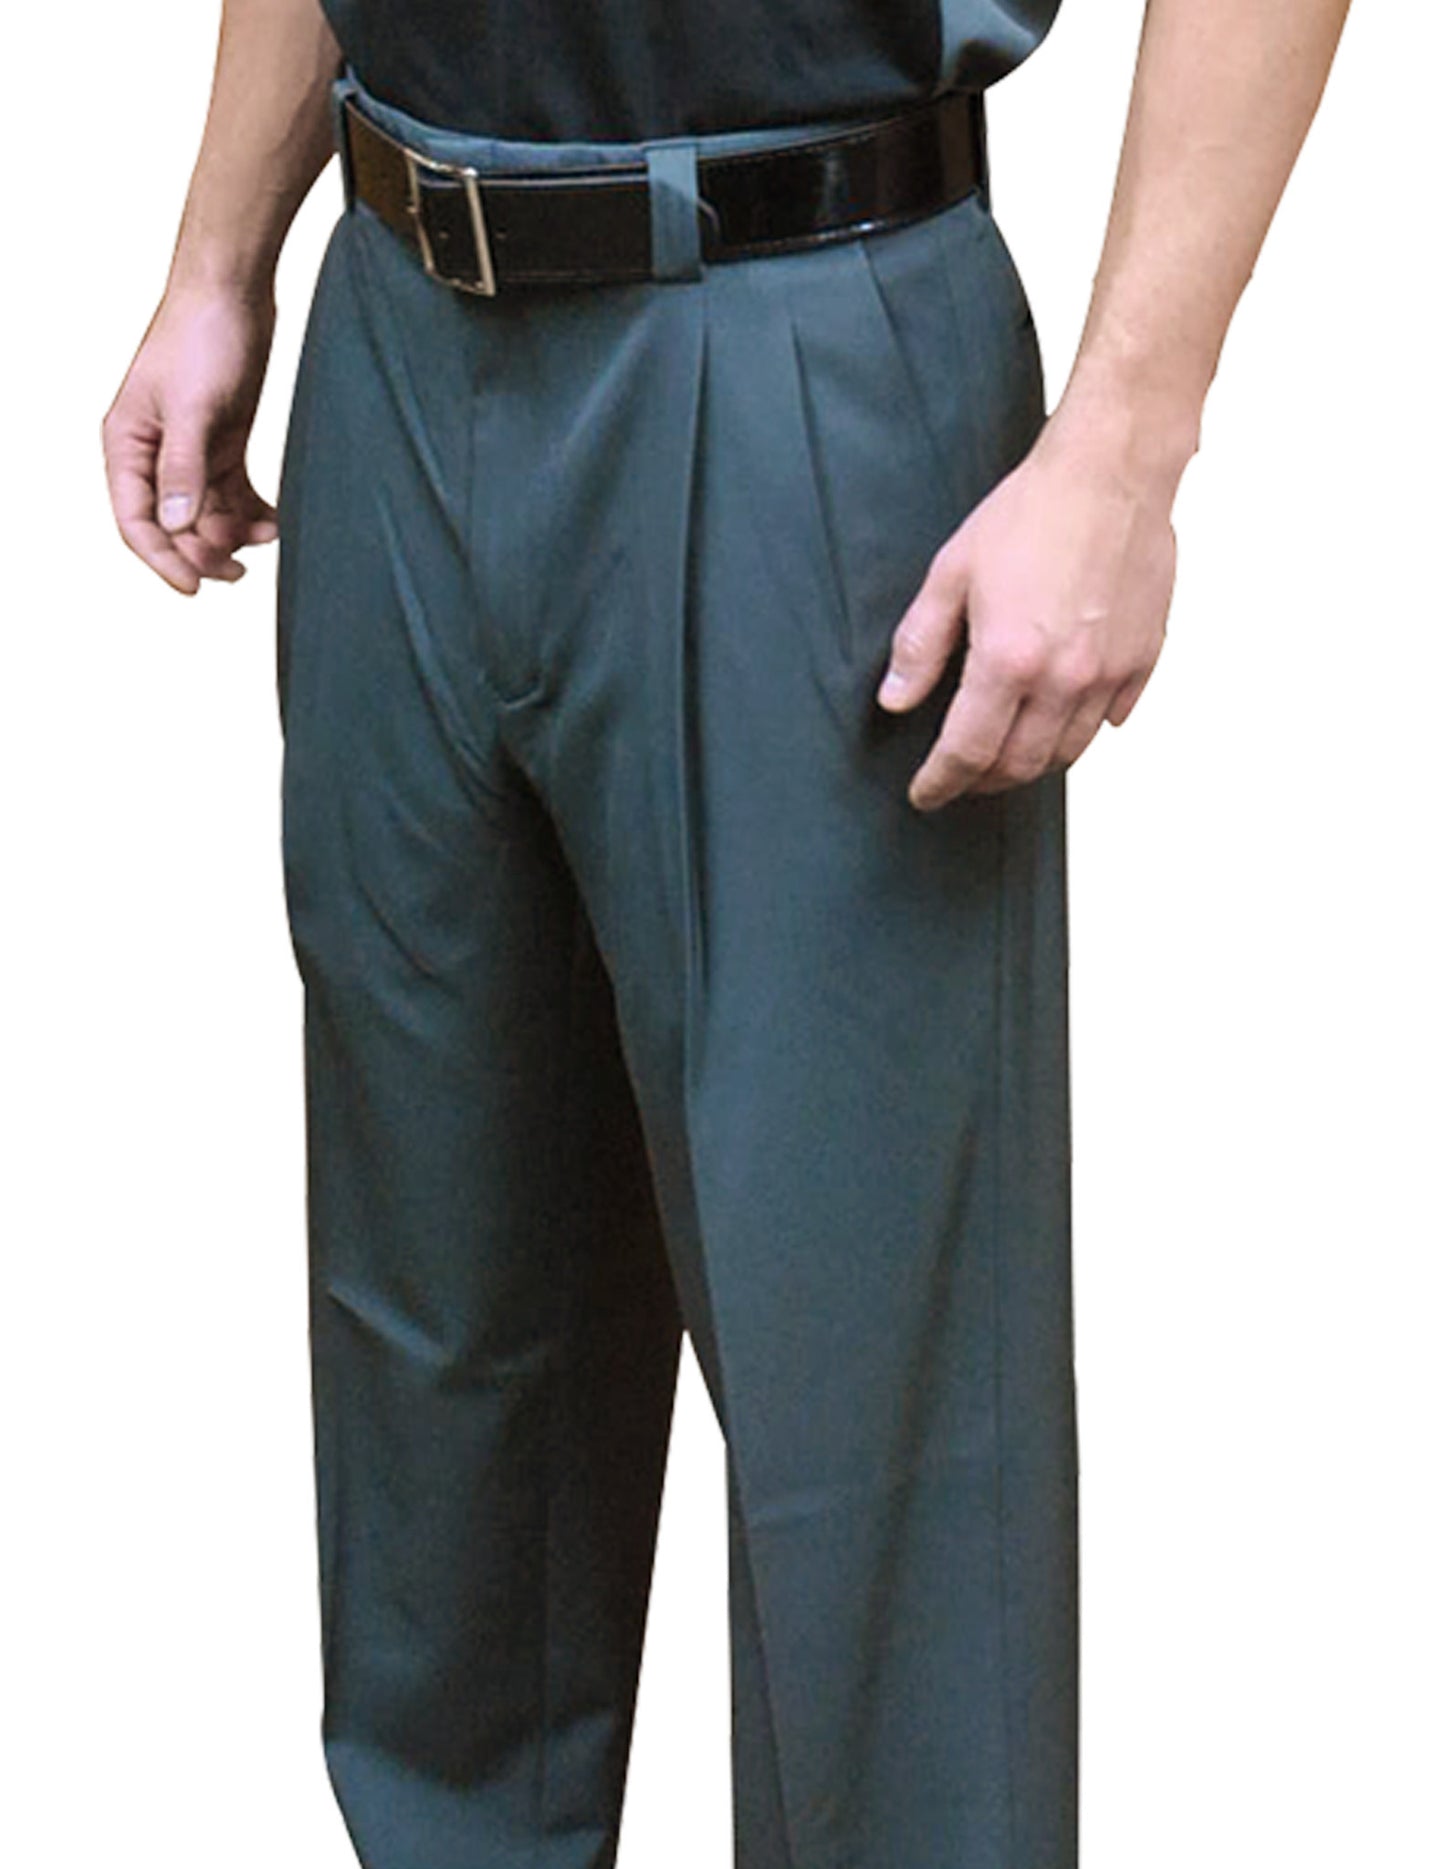 BBS395- Smitty "NEW EXPANDER WAISTBAND - 4-Way Stretch" Pleated Combo Pants-Charcoal Grey